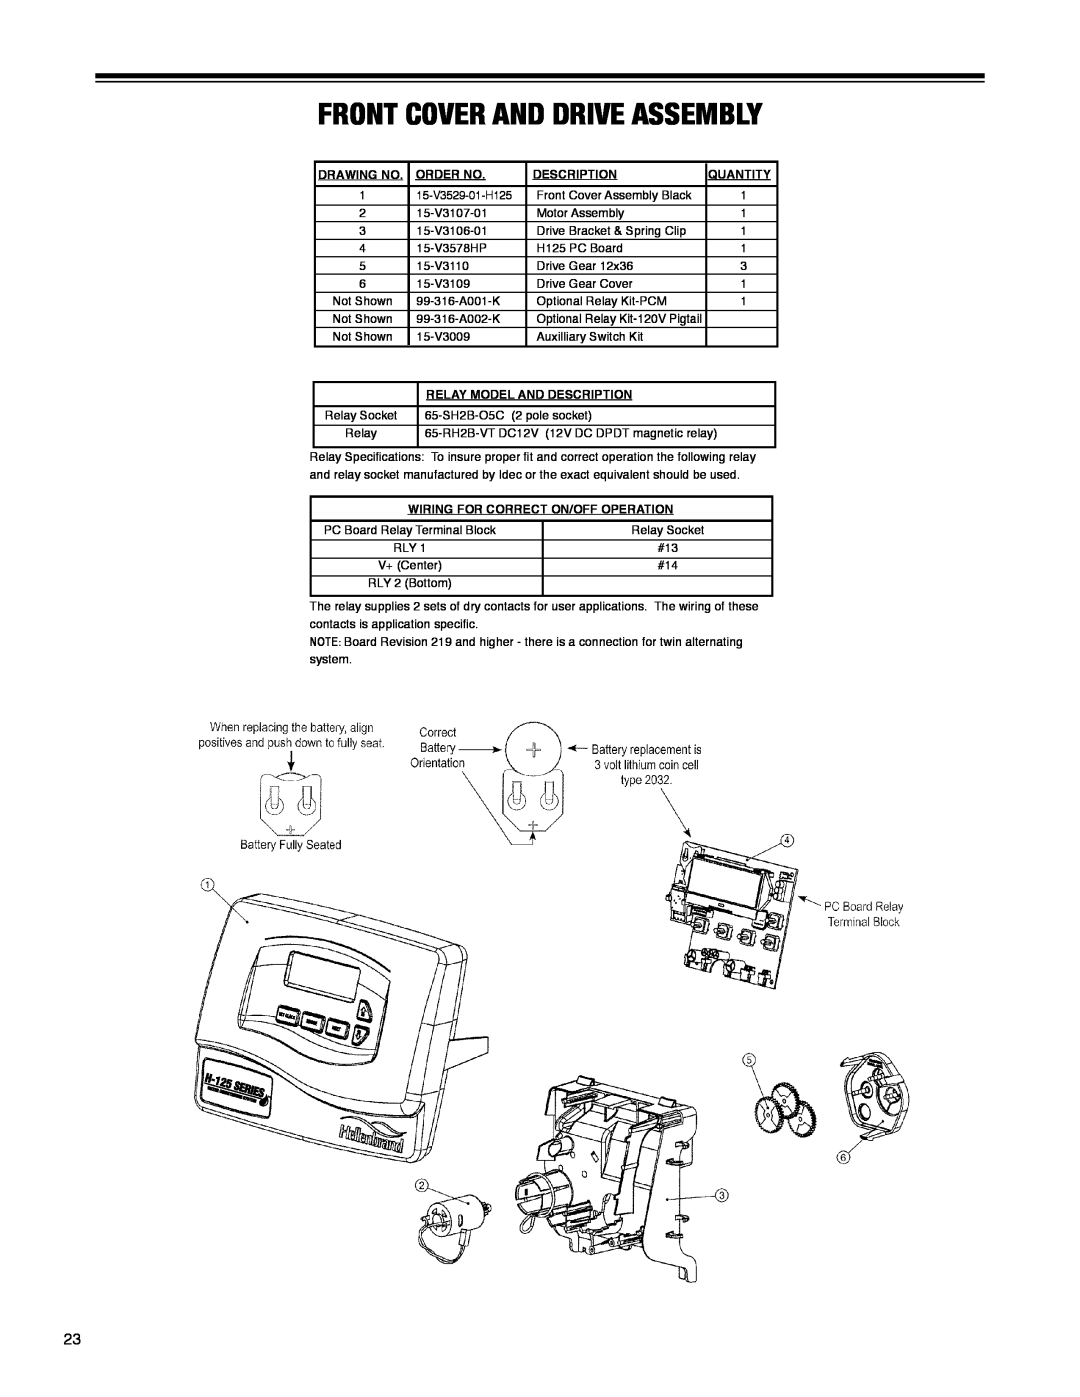 Argosy Research H-125 Series owner manual Front Cover And Drive Assembly, Drawing No, Order No, Description, Quantity 